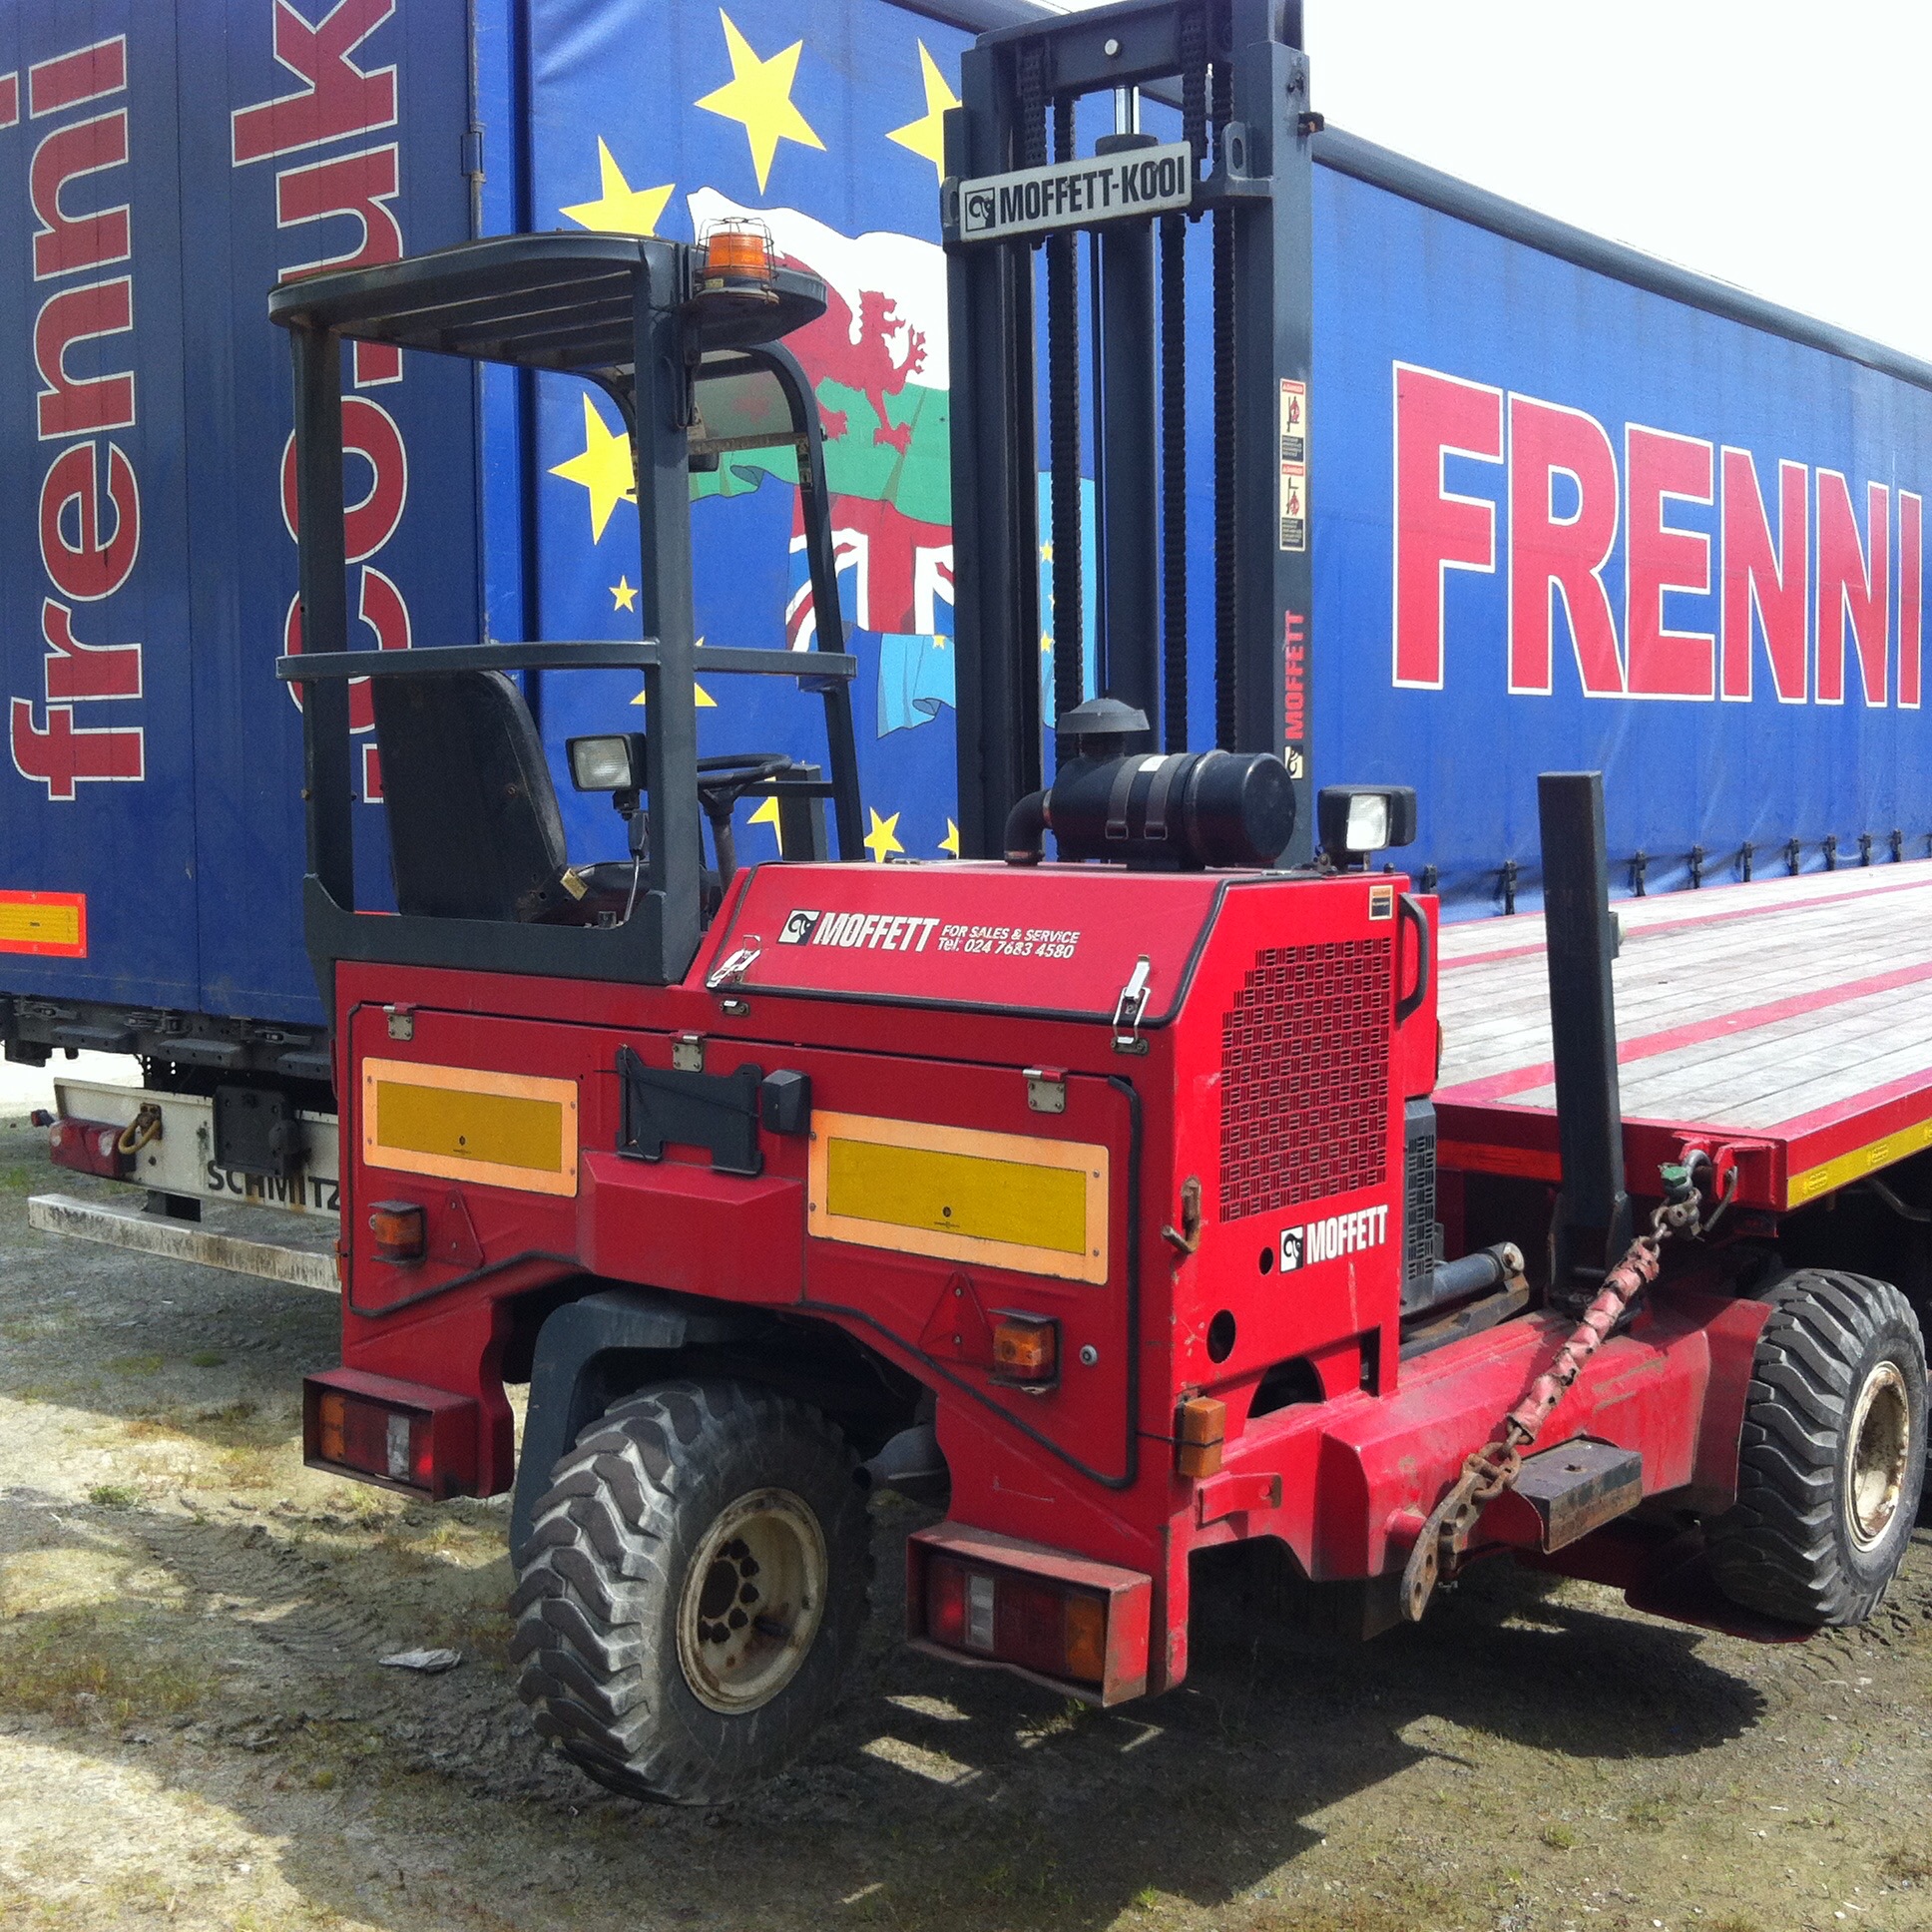 A frenni trailer and equipment at the yard